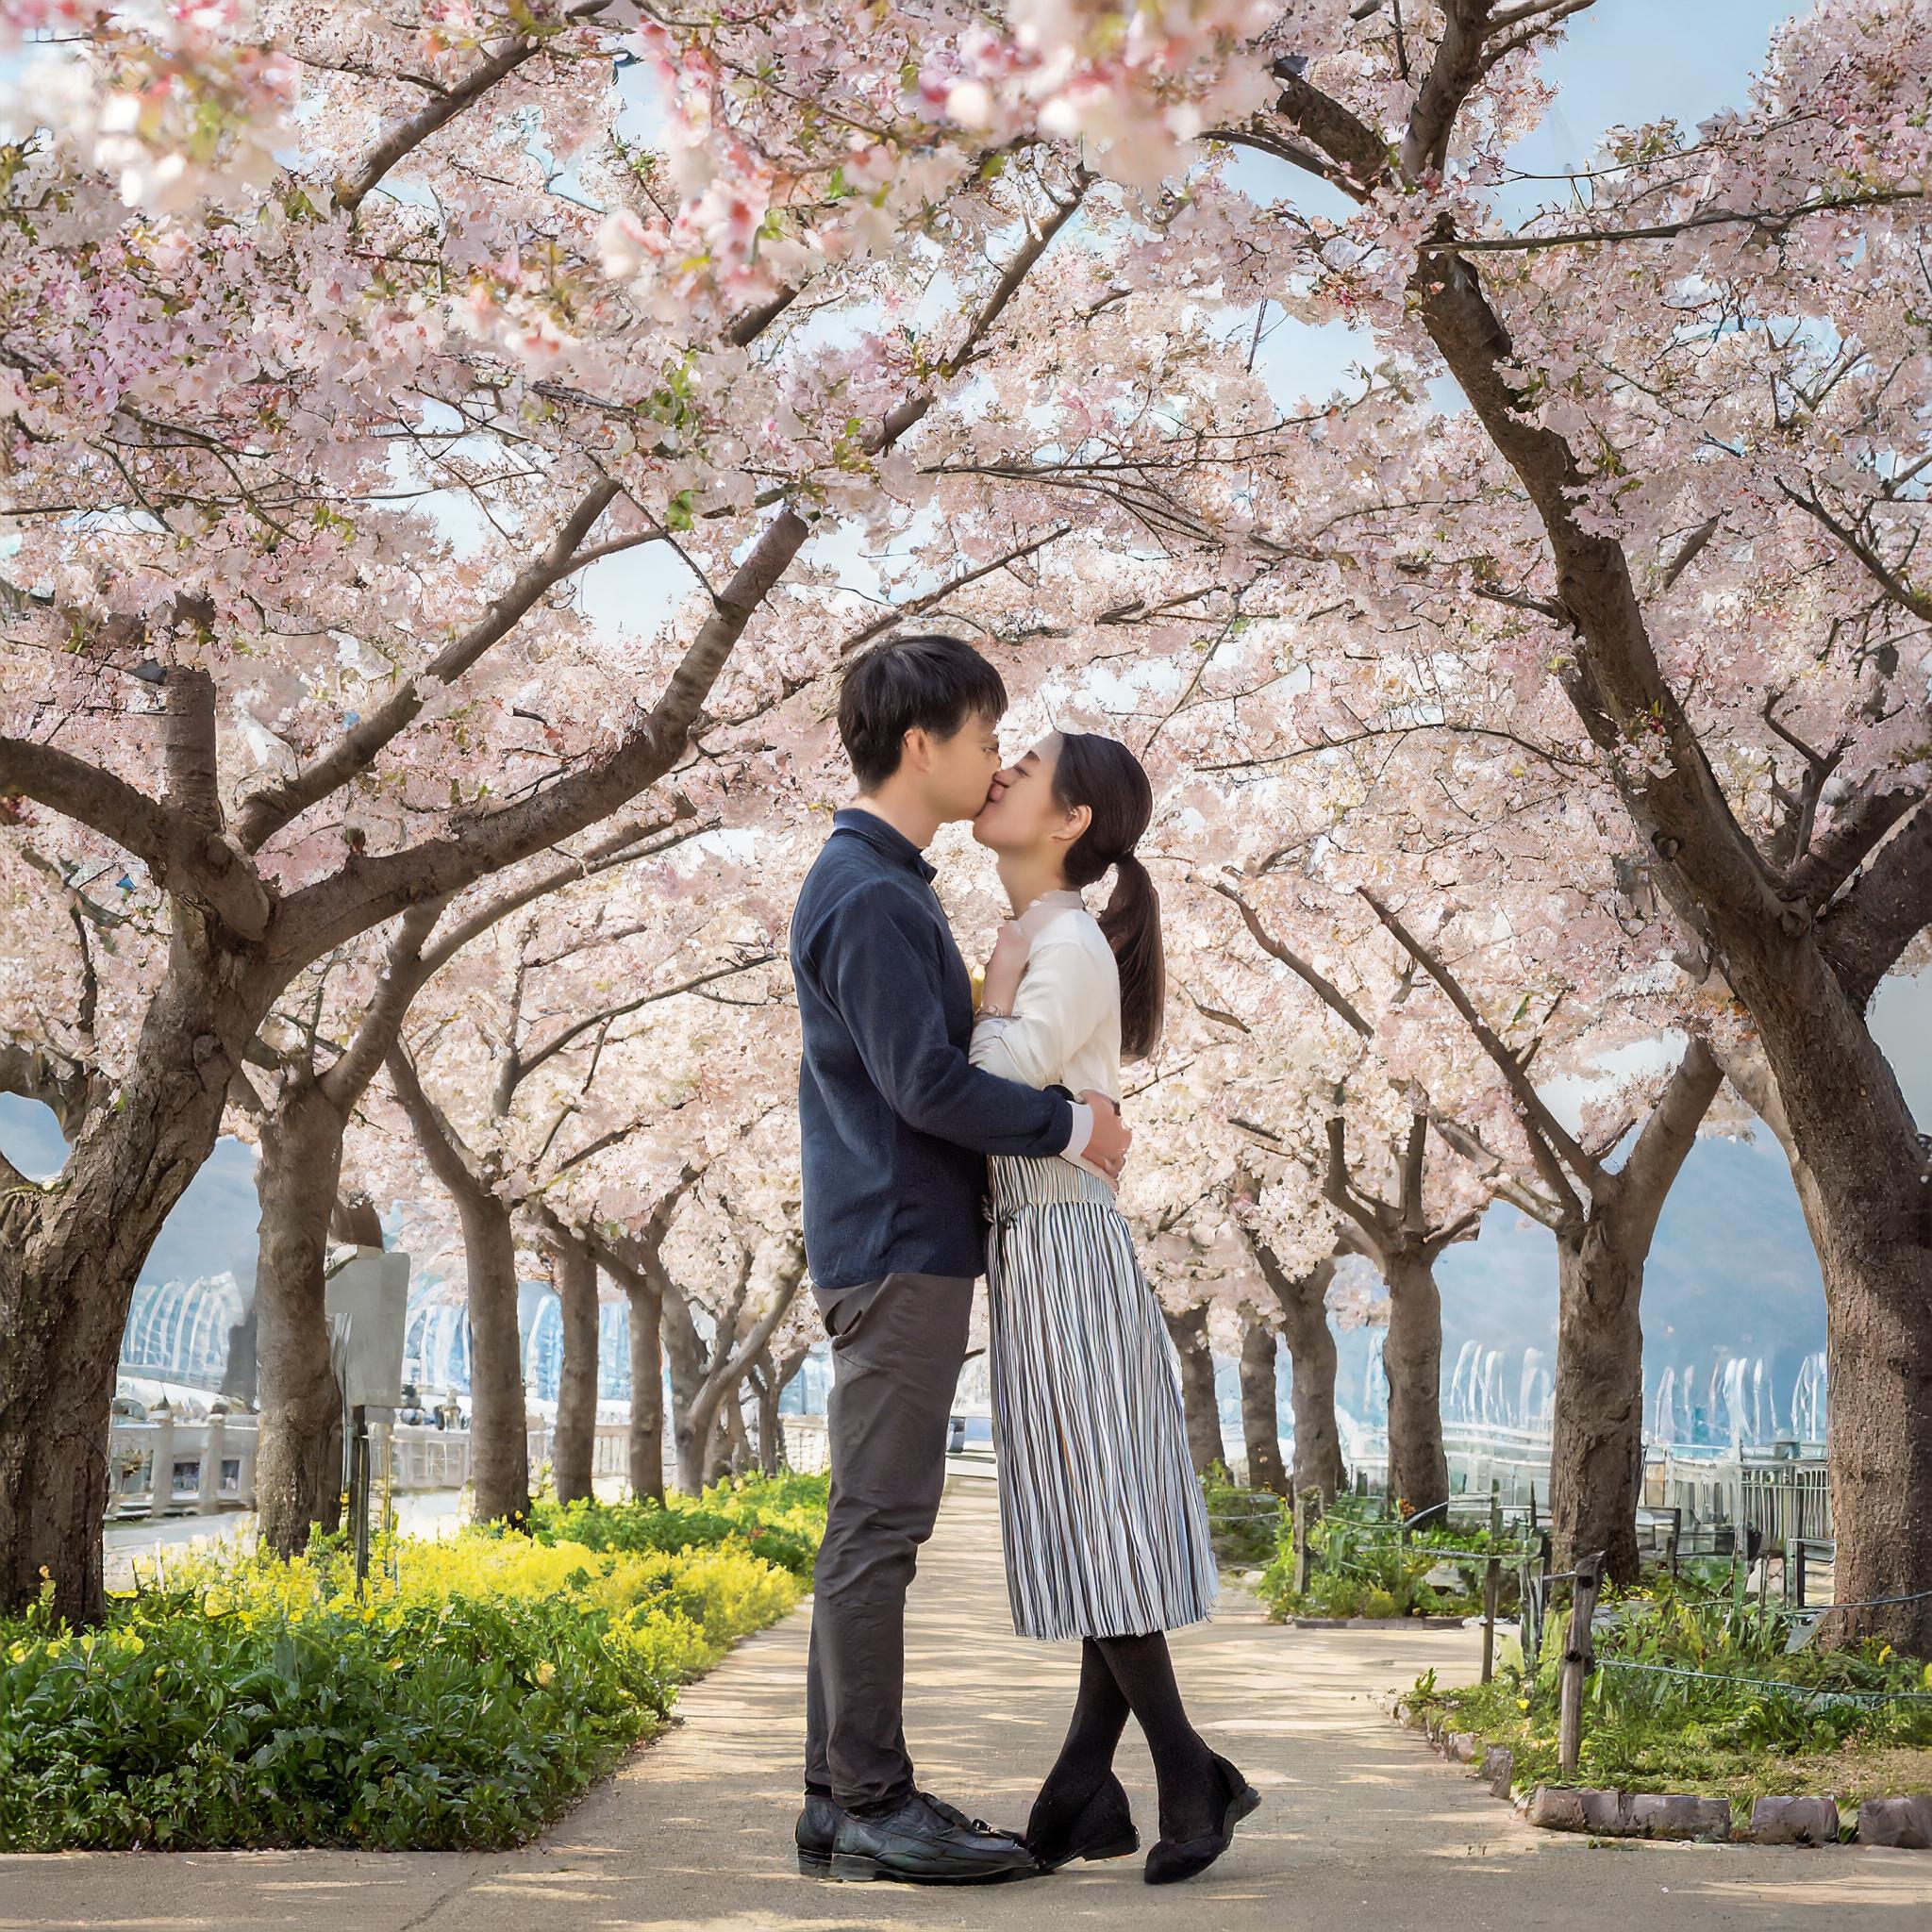 couple kissing under cherry blossom trees in south korea in the distance